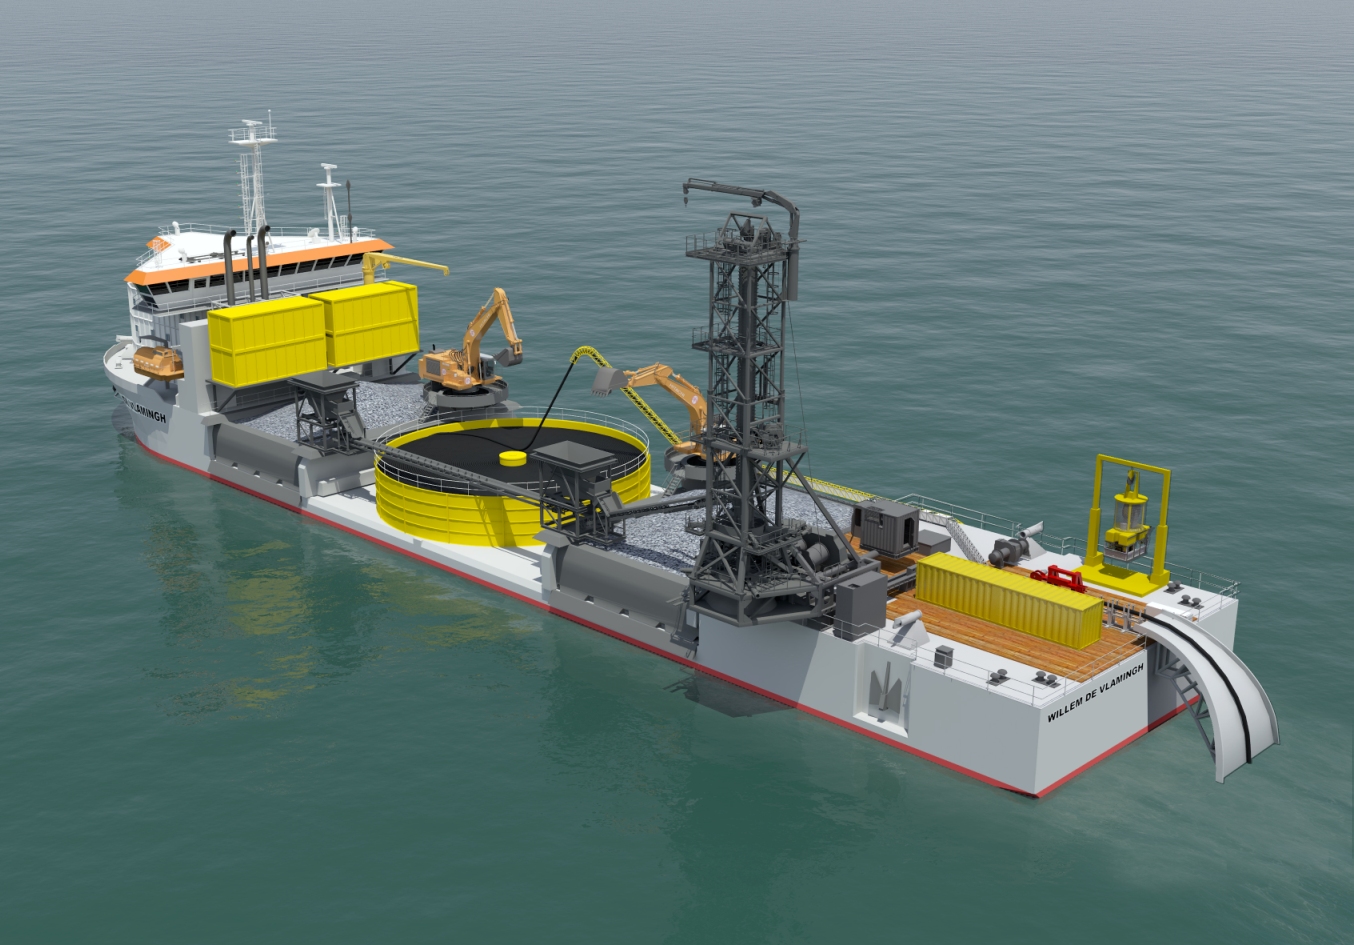 Belgium: Jan De Nul Group Orders Cable Turntable for Northwind Offshore Wind Farm